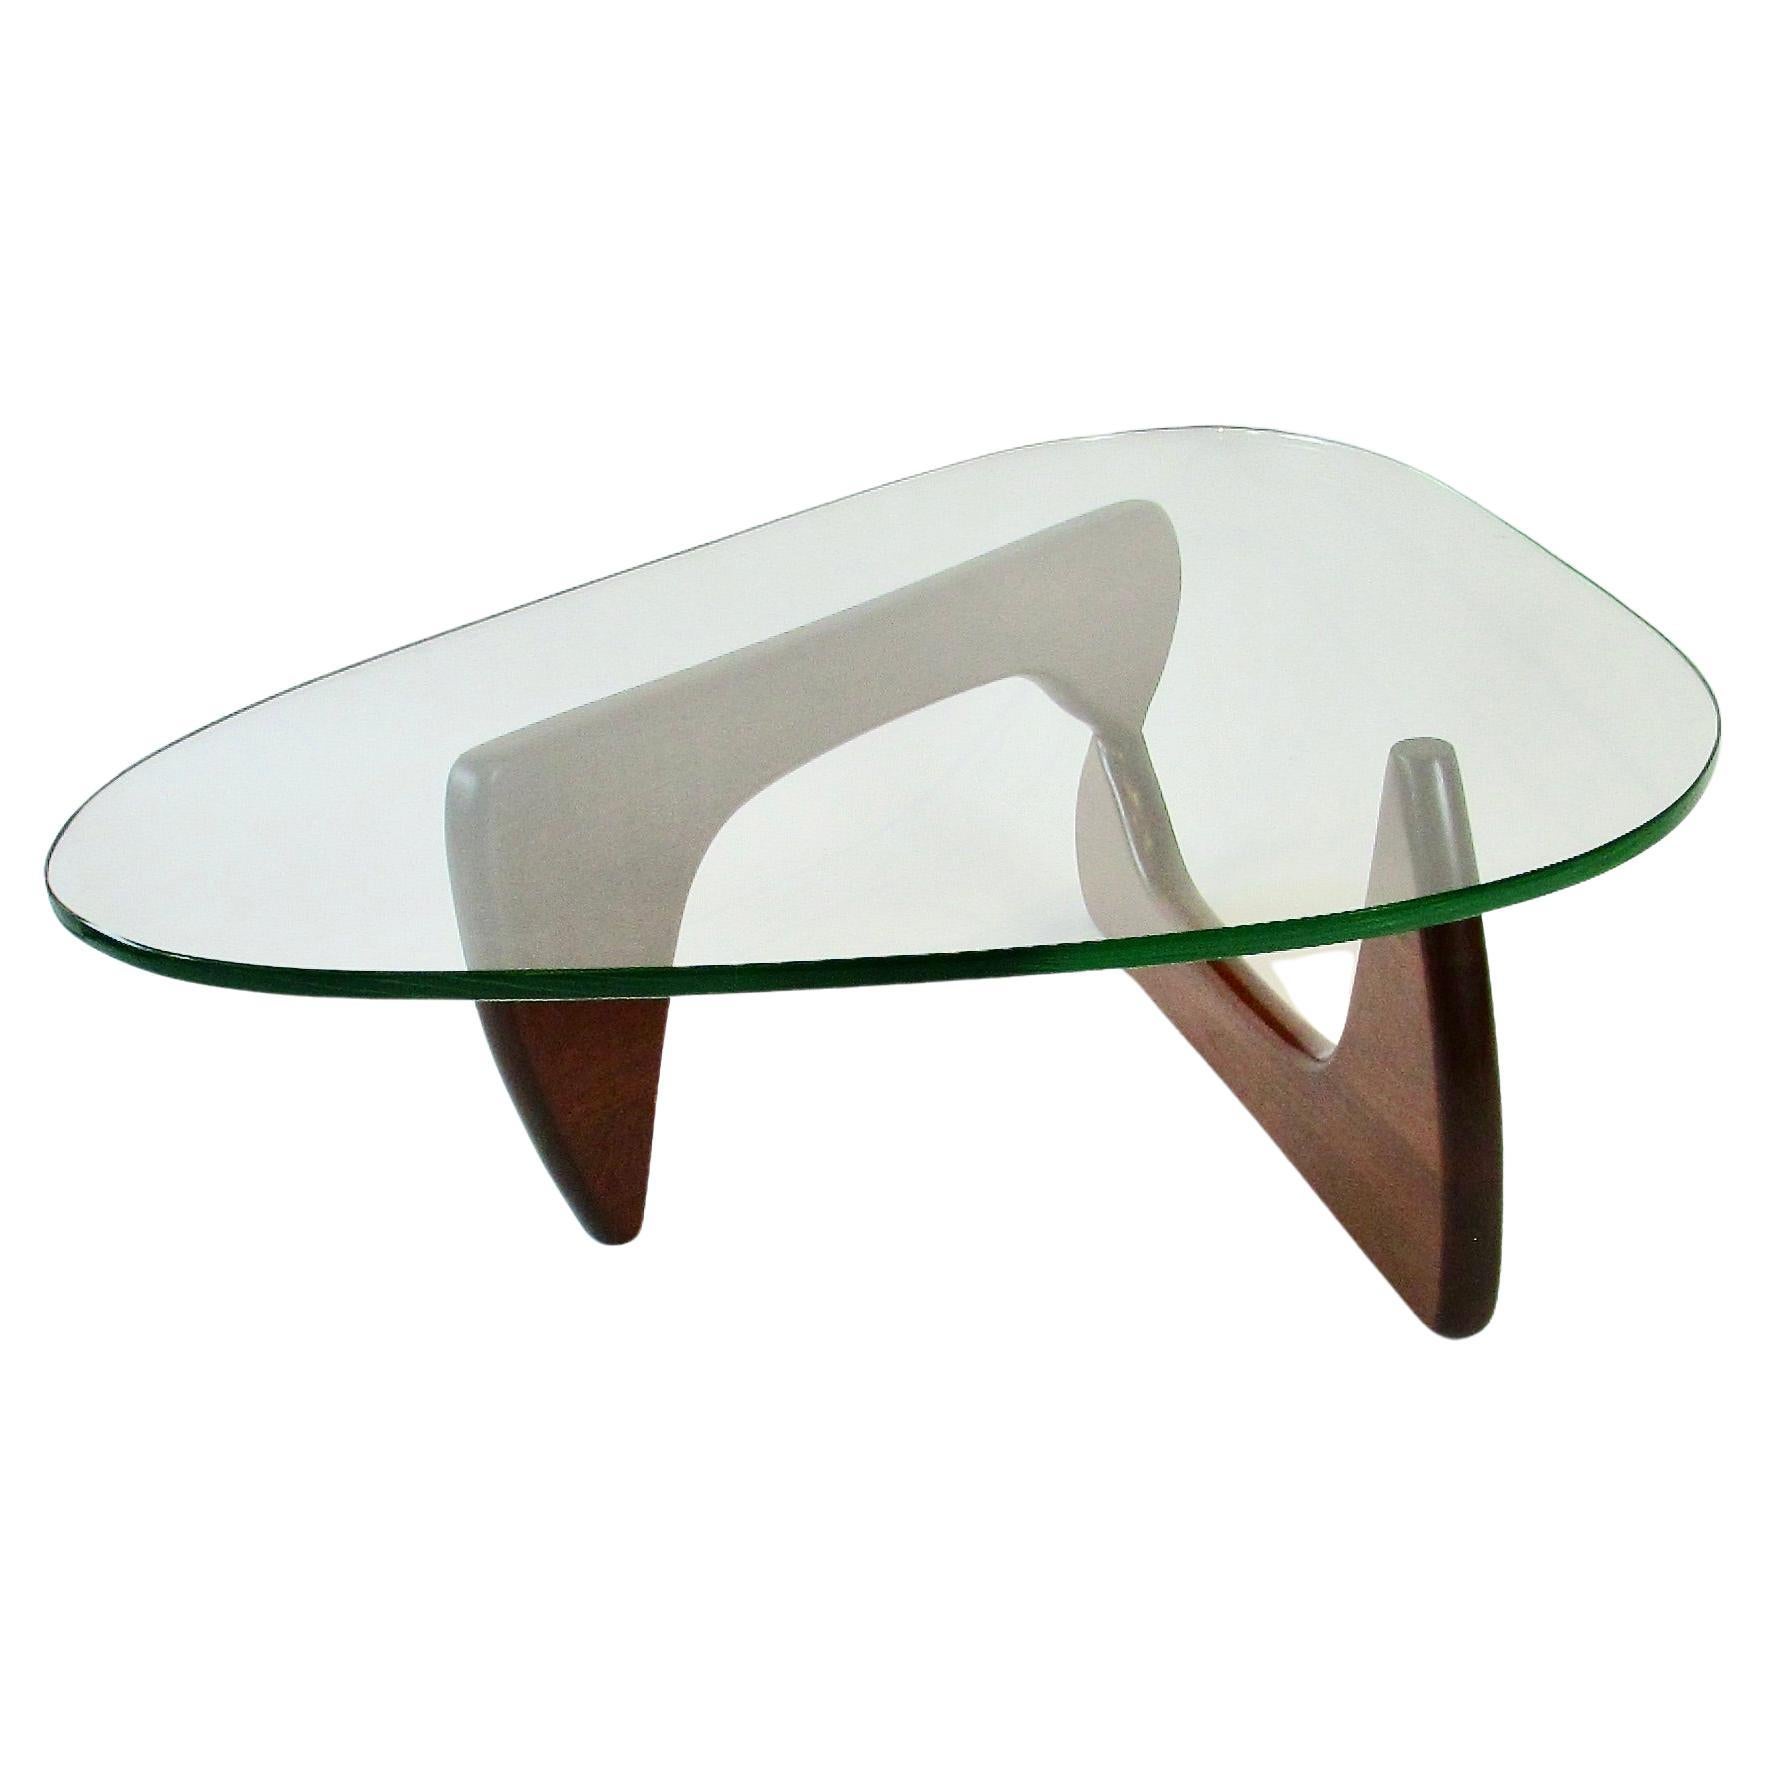 How do I tell if a Noguchi table is genuine?